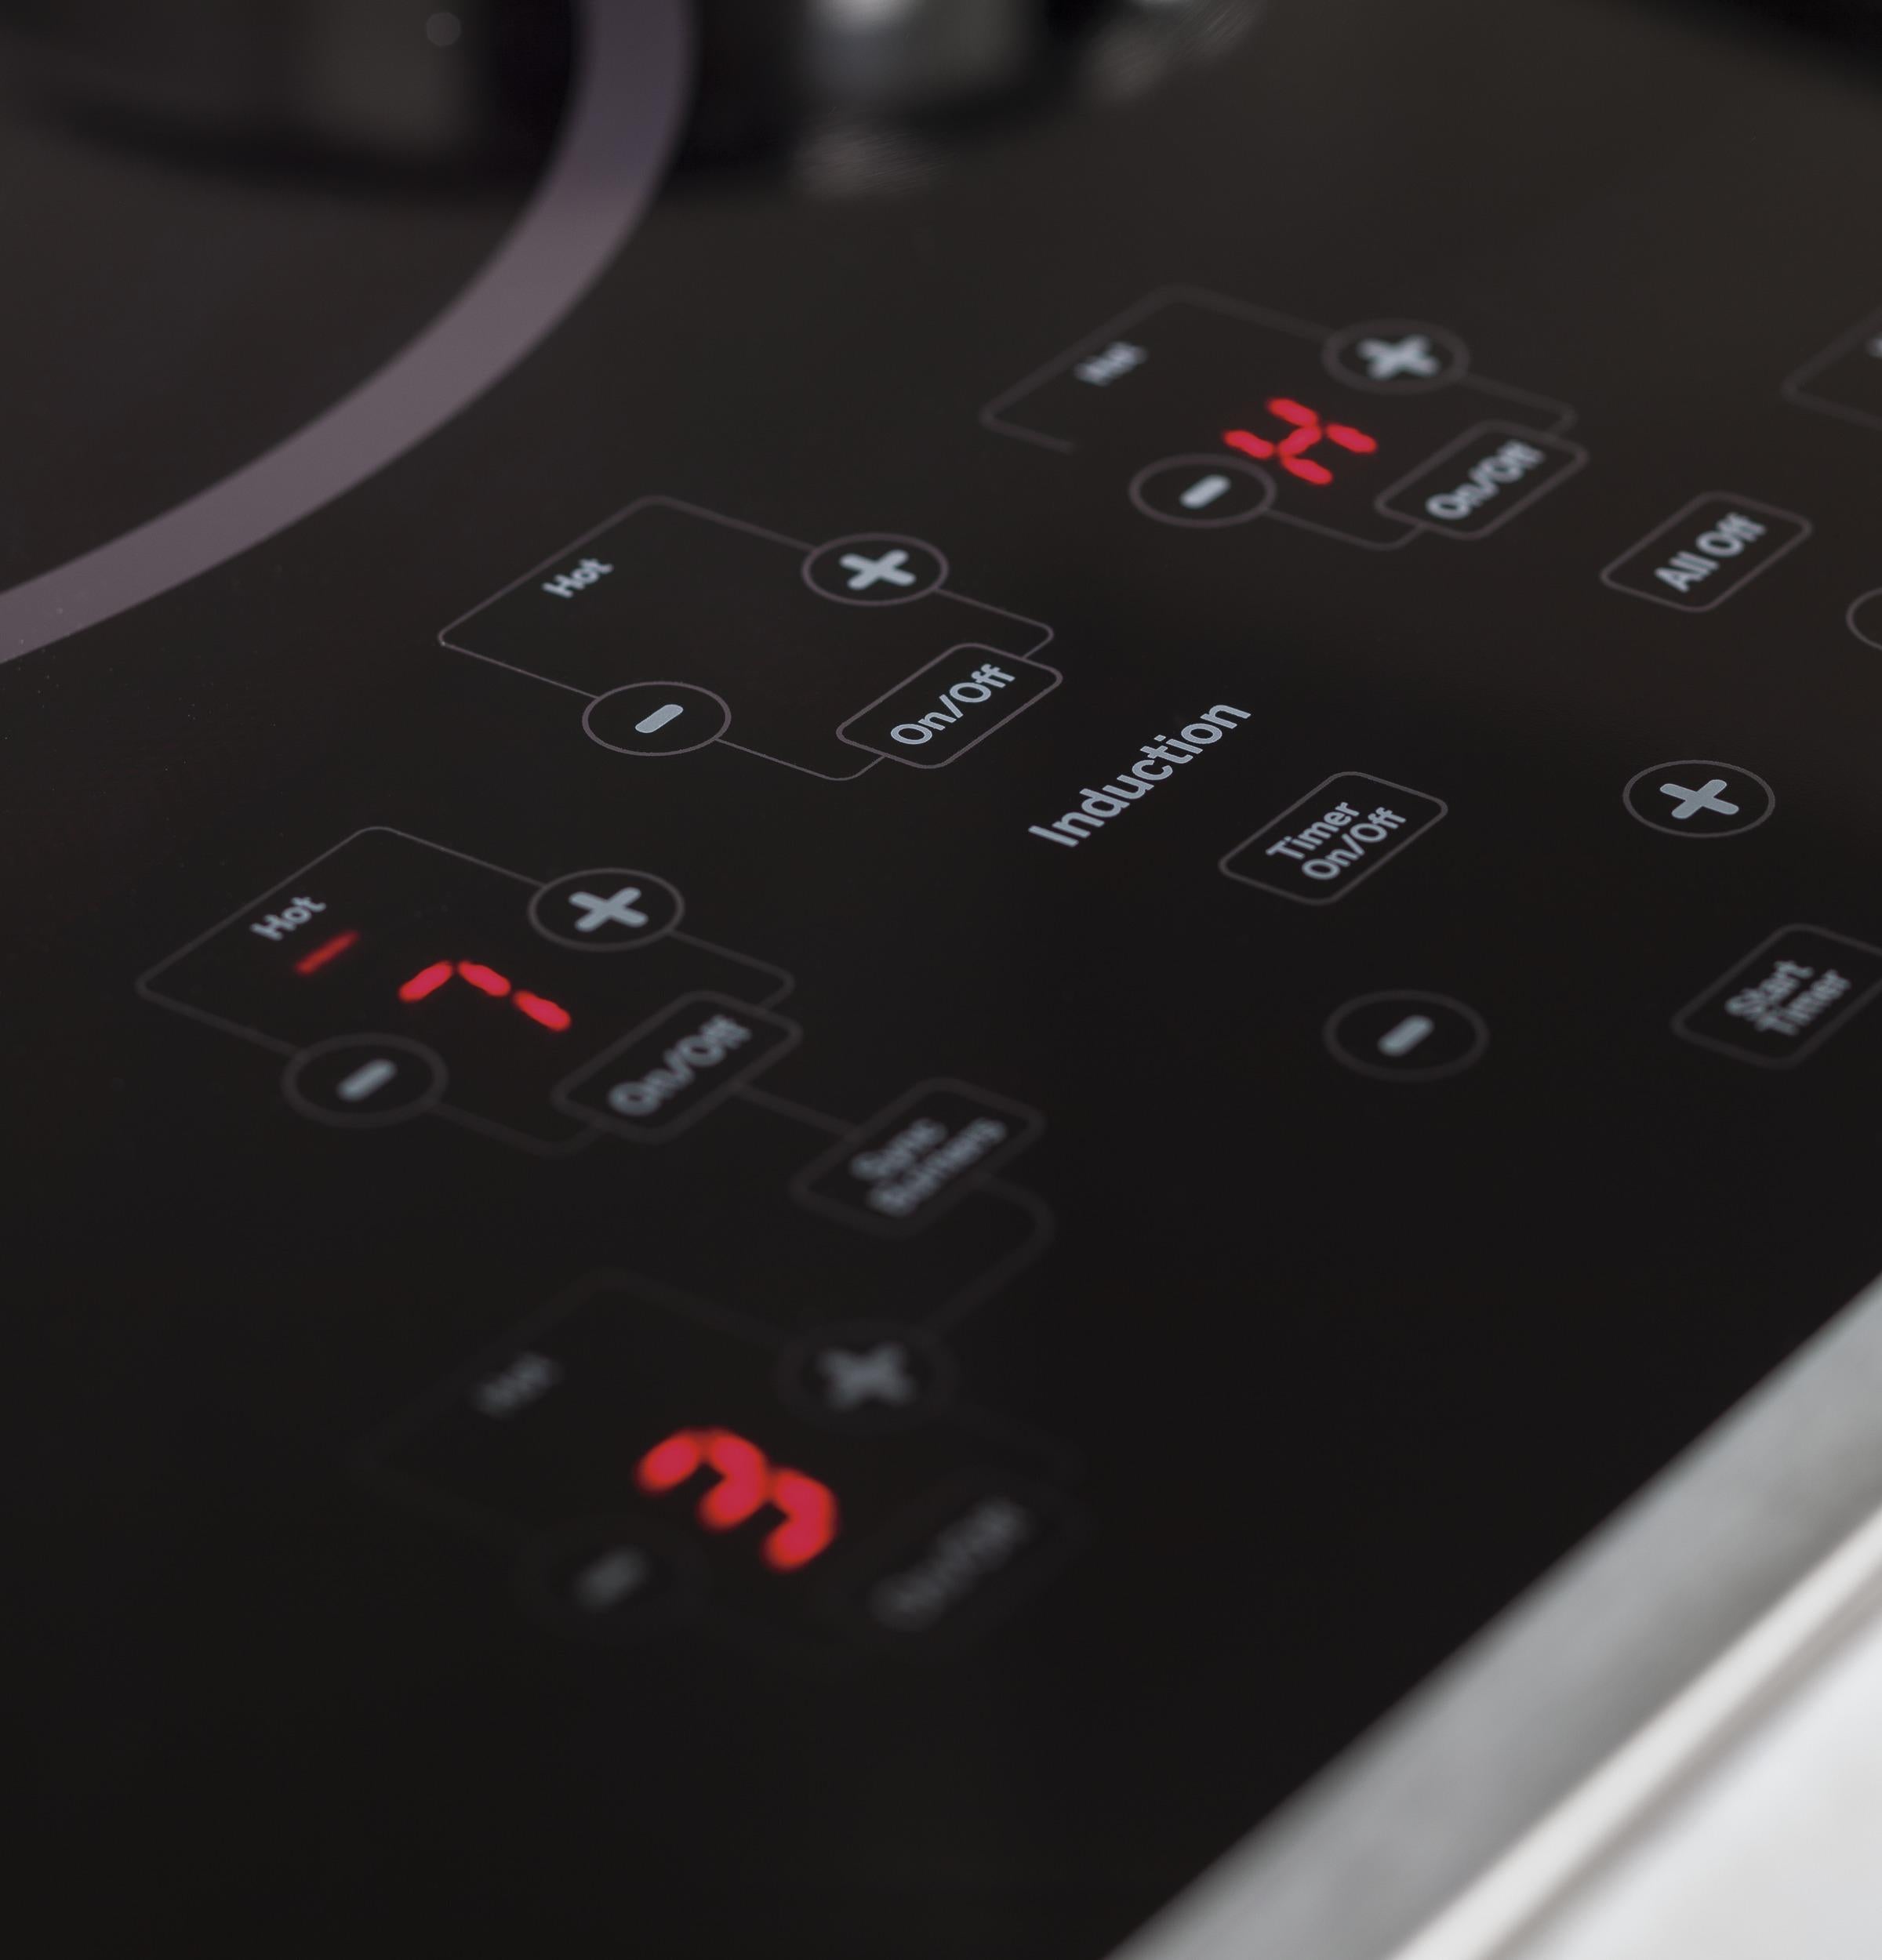 GE Profile™ 30 Built-In Touch Control Electric Cooktop